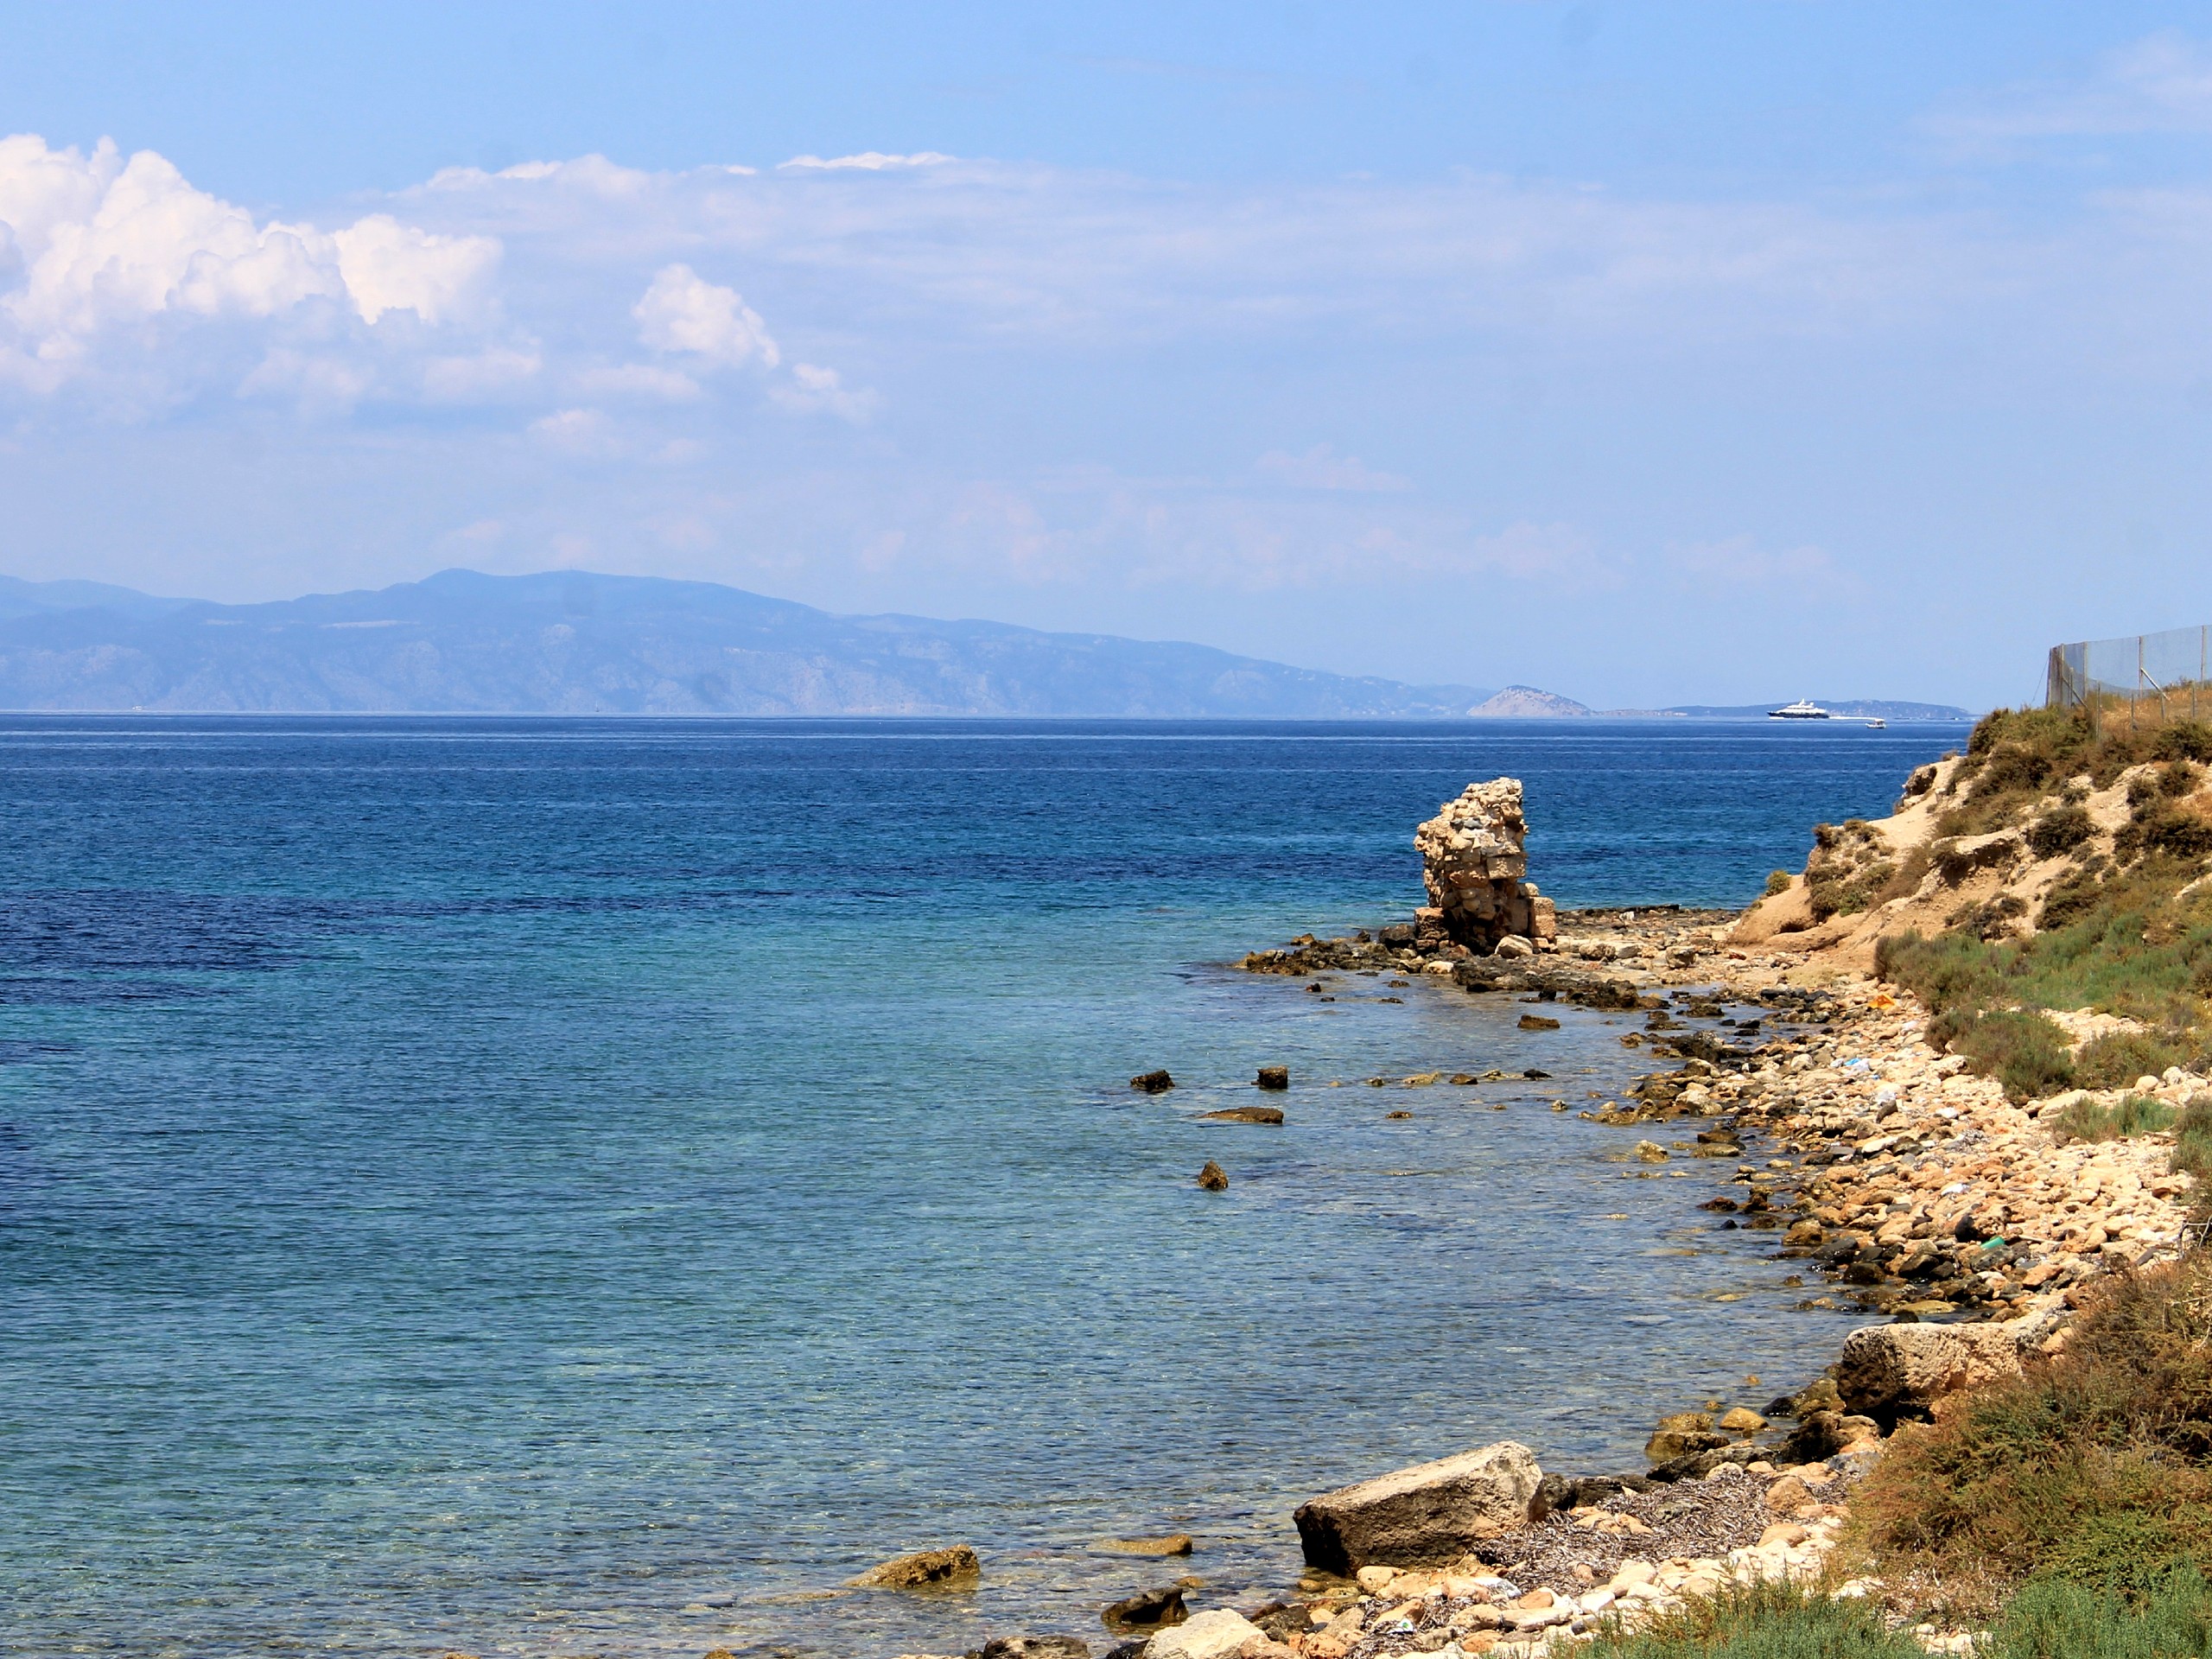 Looking at the Mediterranean Sea from the shores of the Aegina Island